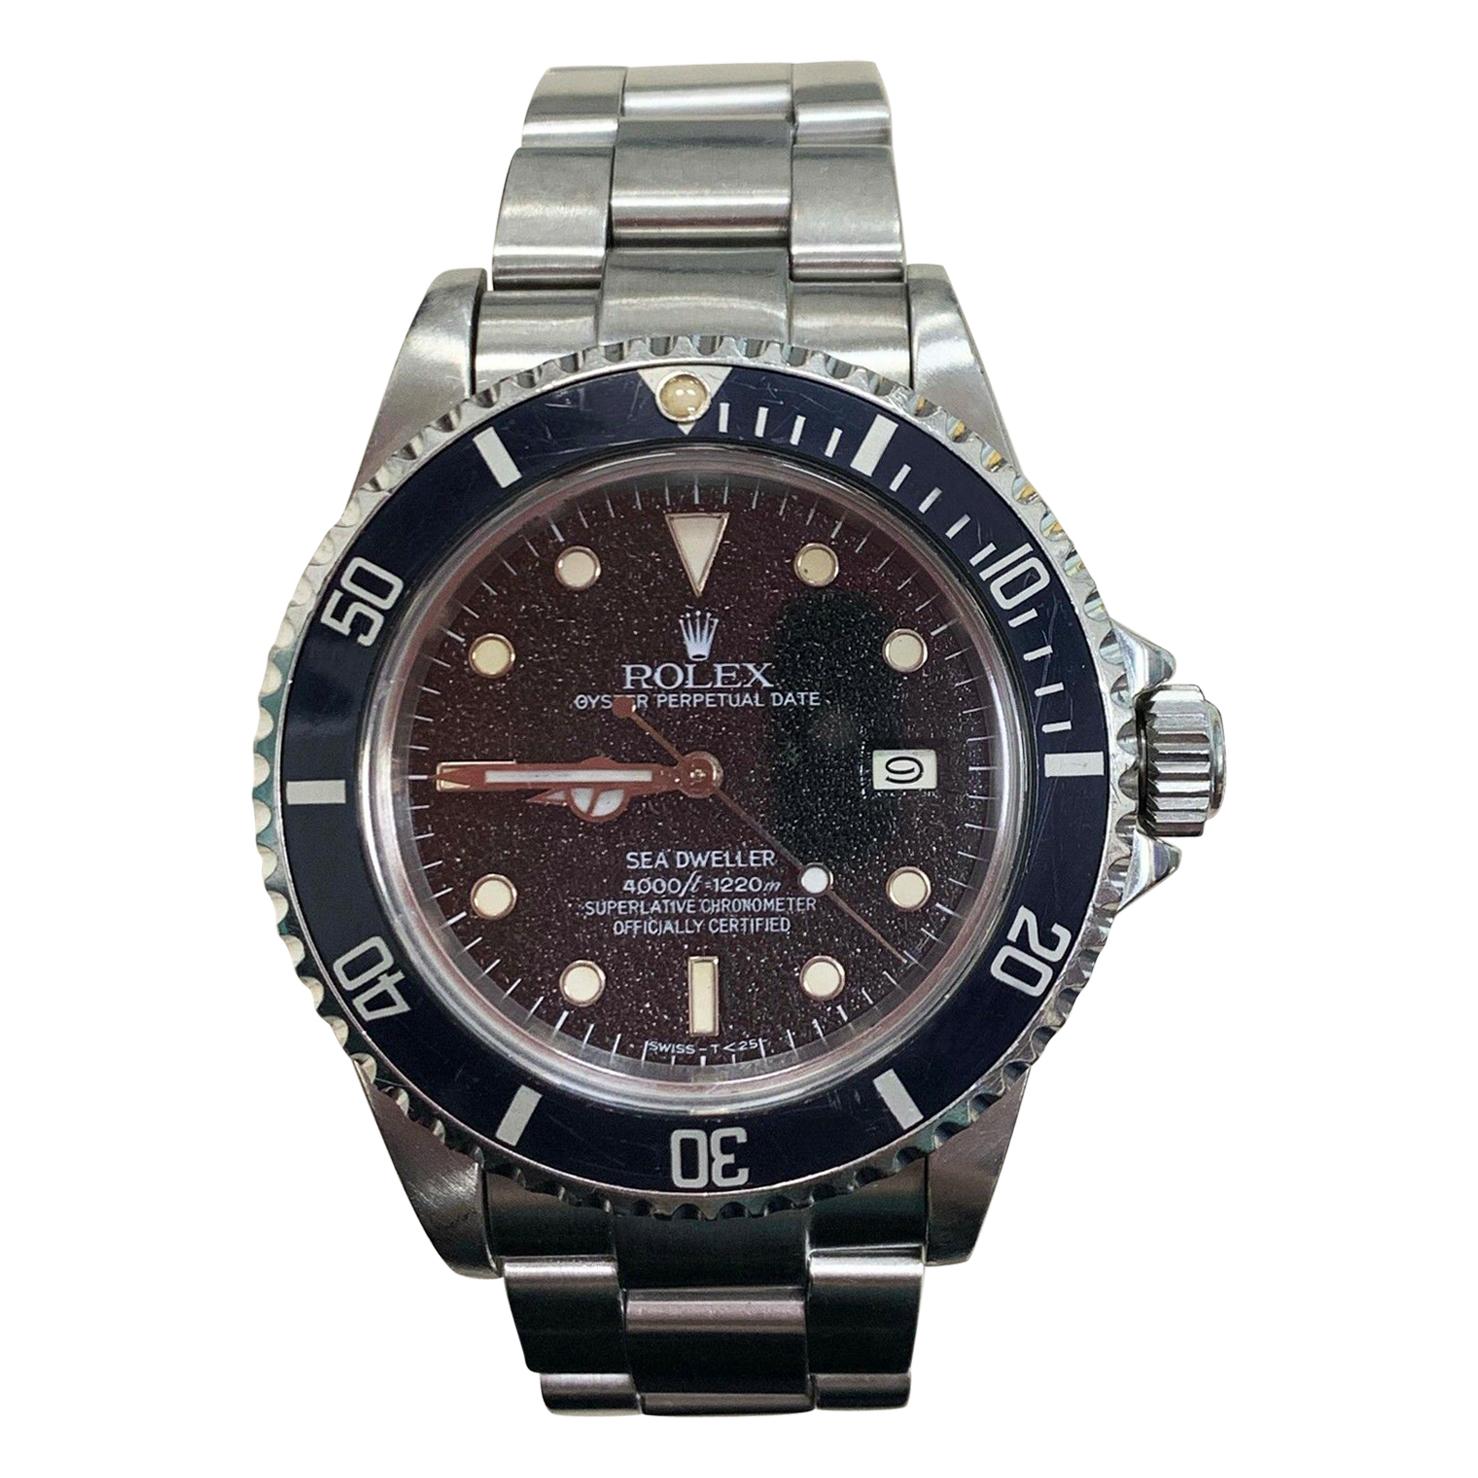 Rolex Sea Dweller 16660 Black Very Rare Stardust Dial Stainless Steel Unpolished